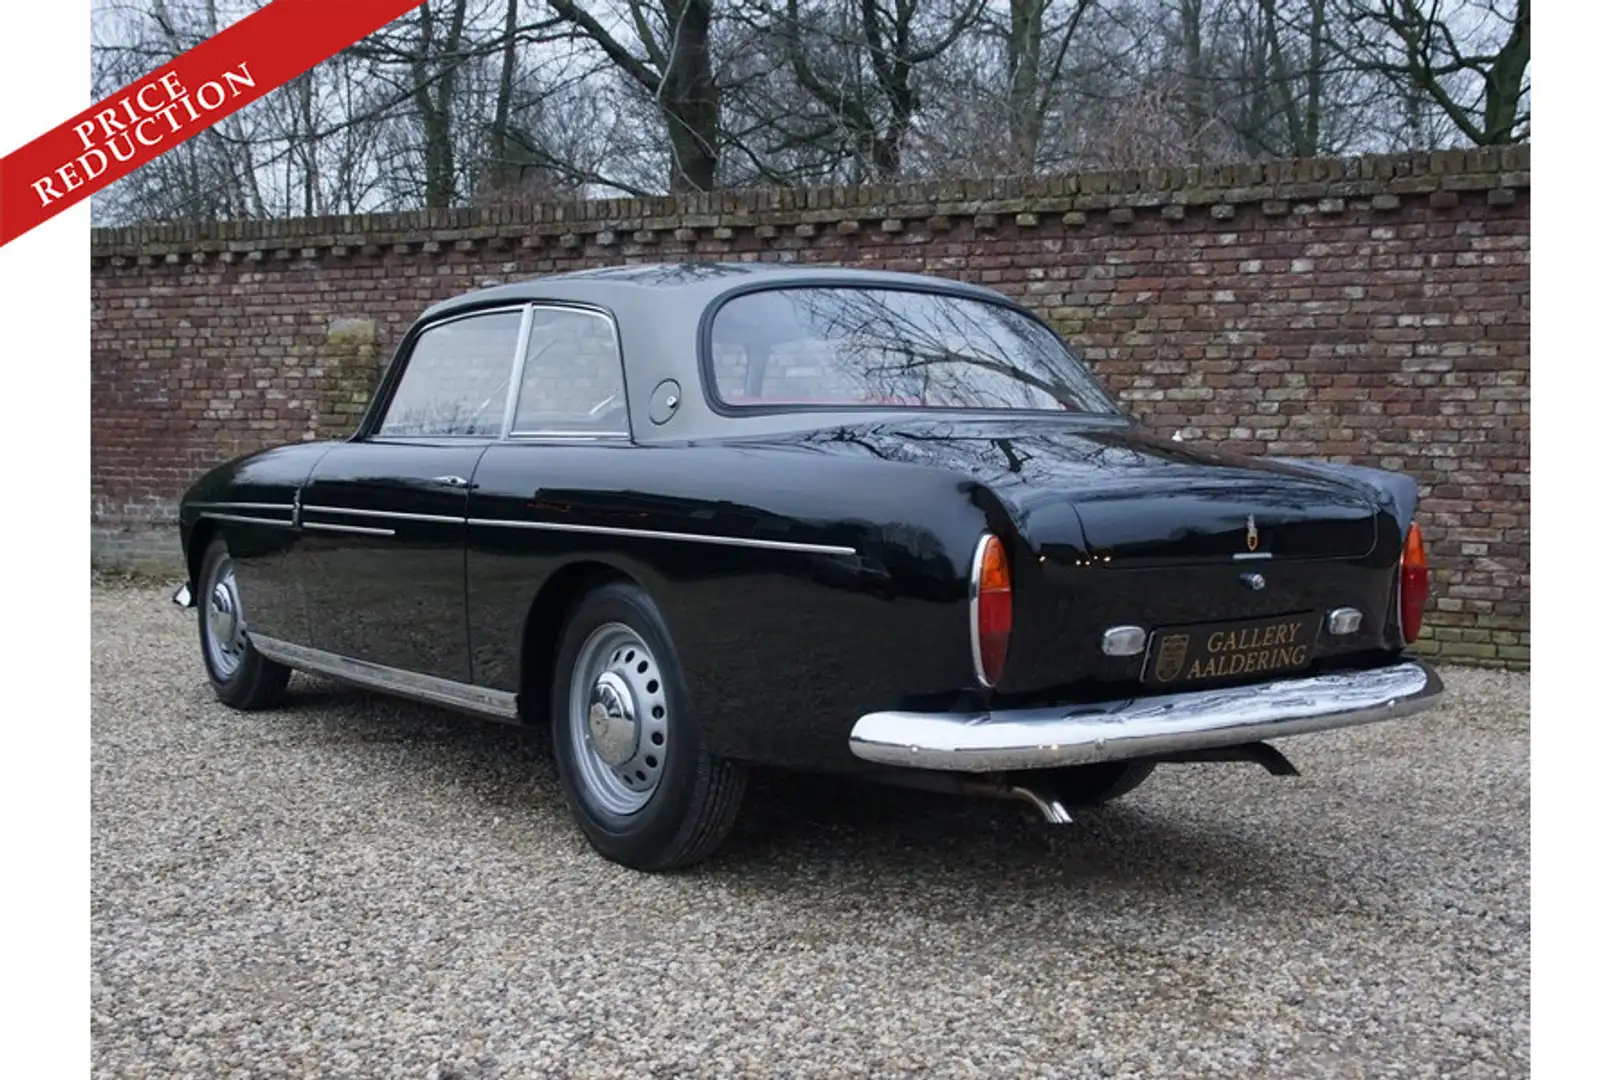 Bristol 408 Saloon PRICE REDUCTION One of only 83 examples mad Negro - 2